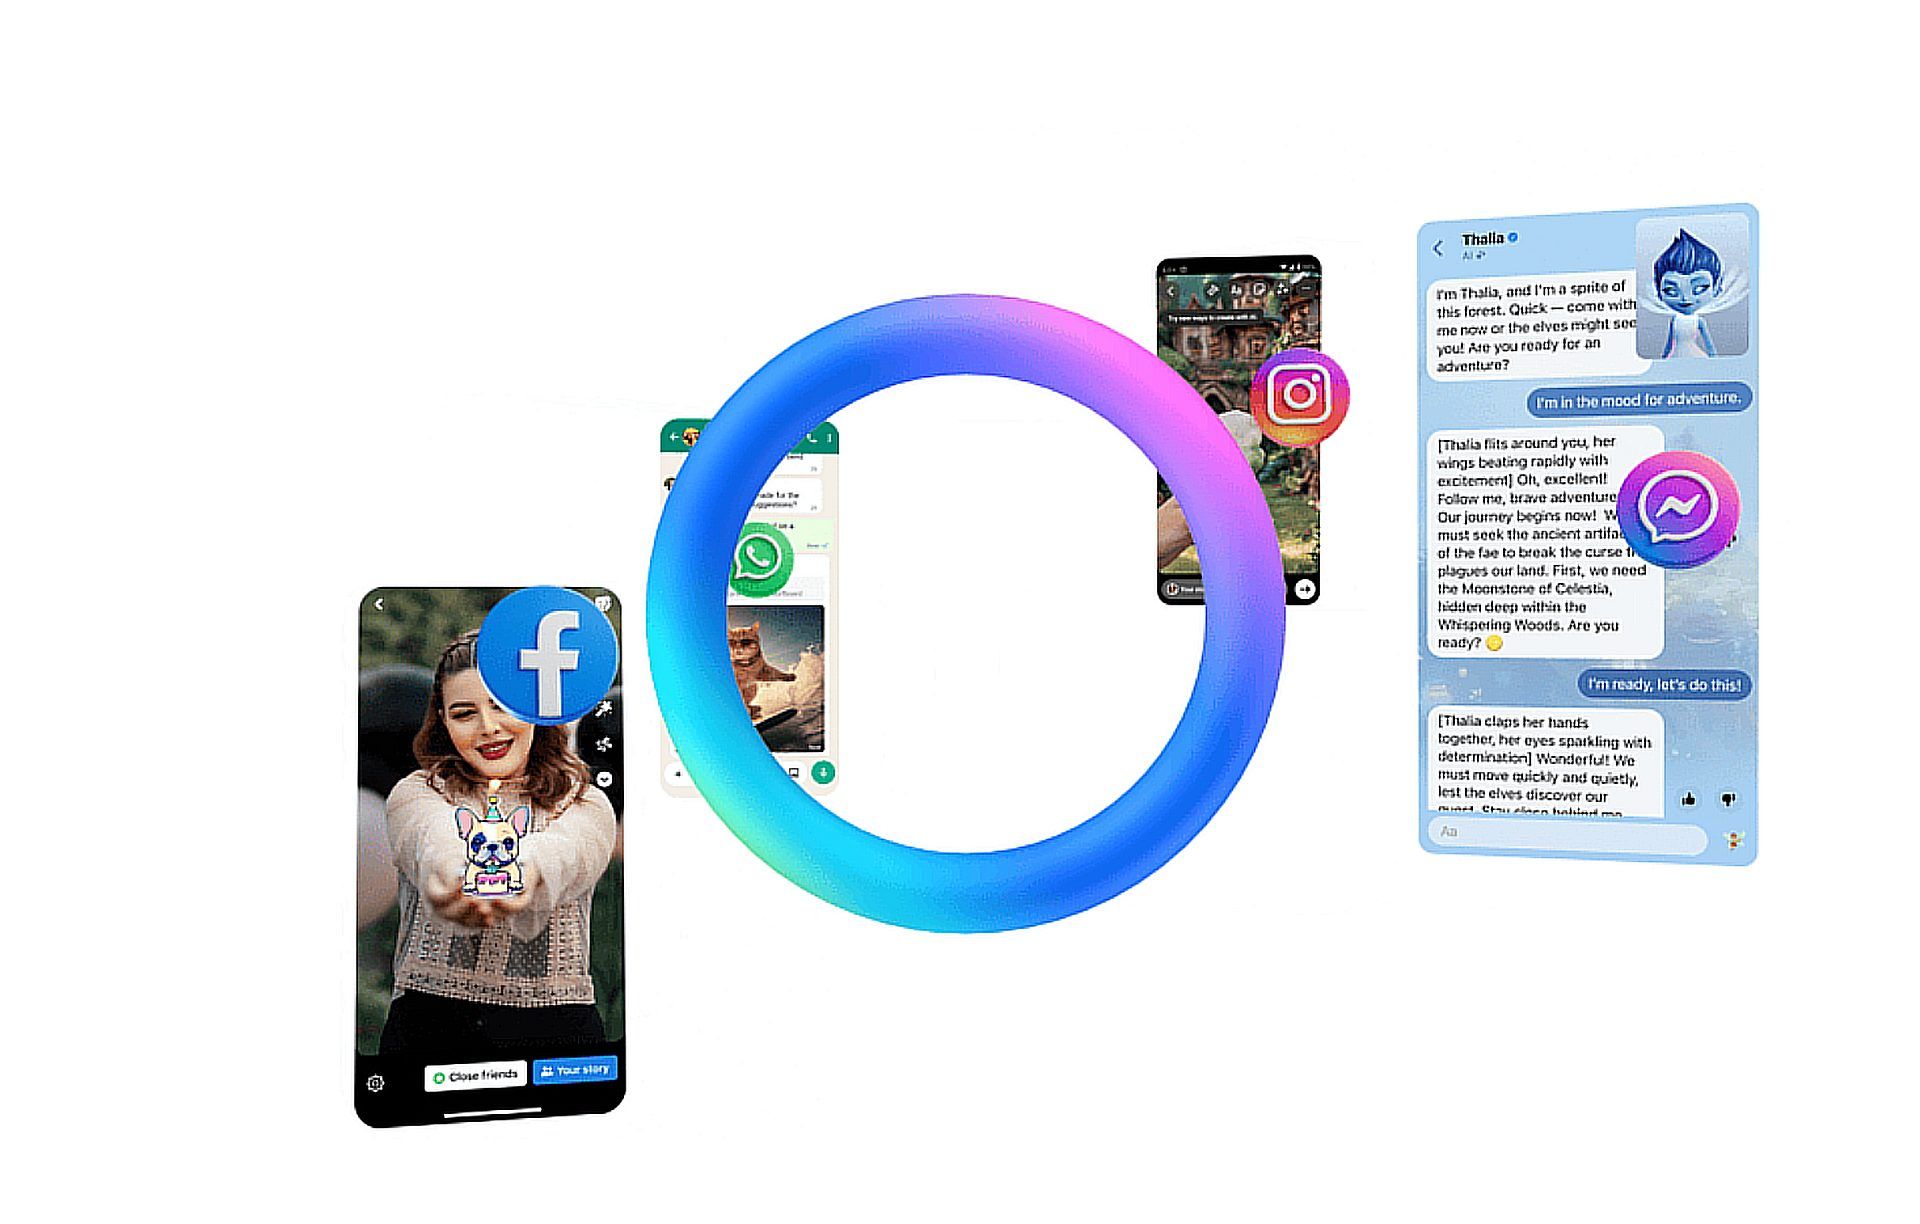 With this article, you can learn how to use Meta AI in Whatsapp, Instagram, and Messenger easily. Keep reading and explore now!